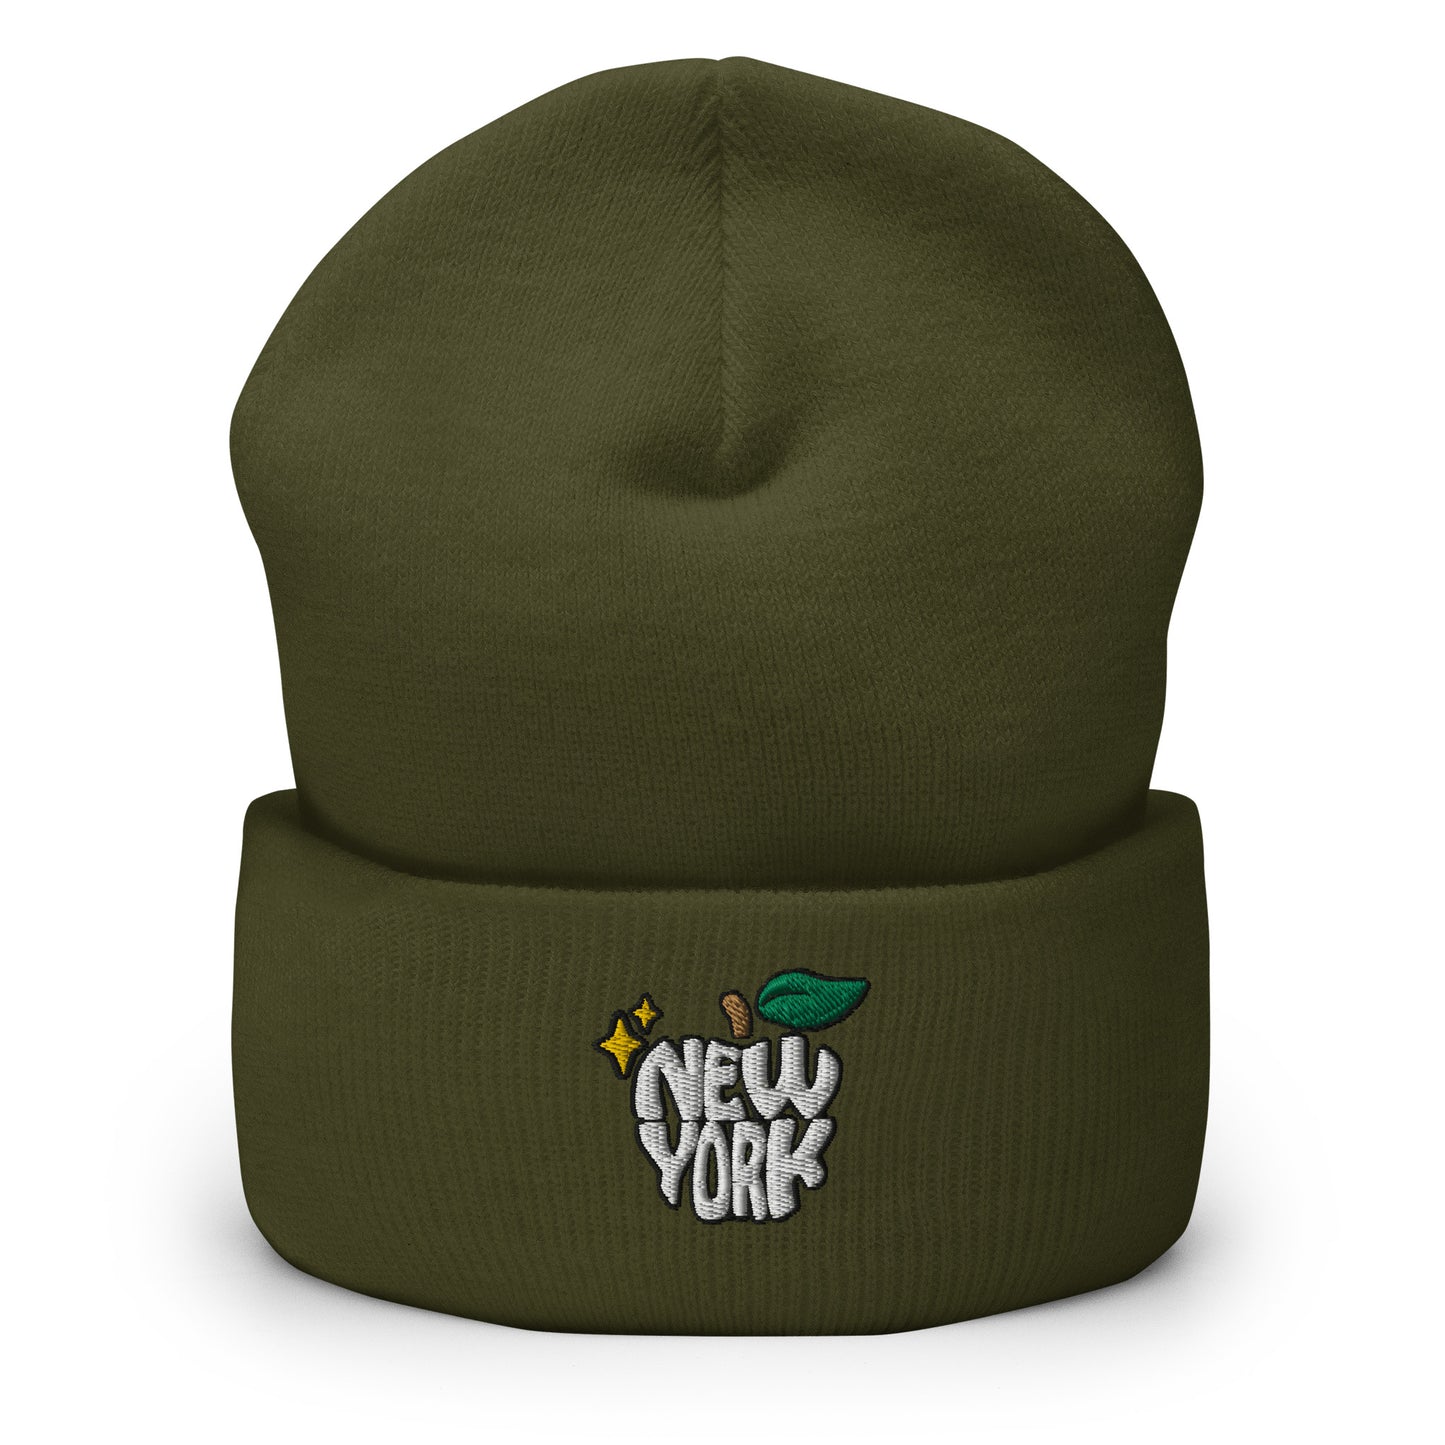 New York Apple Logo Embroidered Olive Green Cuffed Beanie Hat Scattered Streetwear